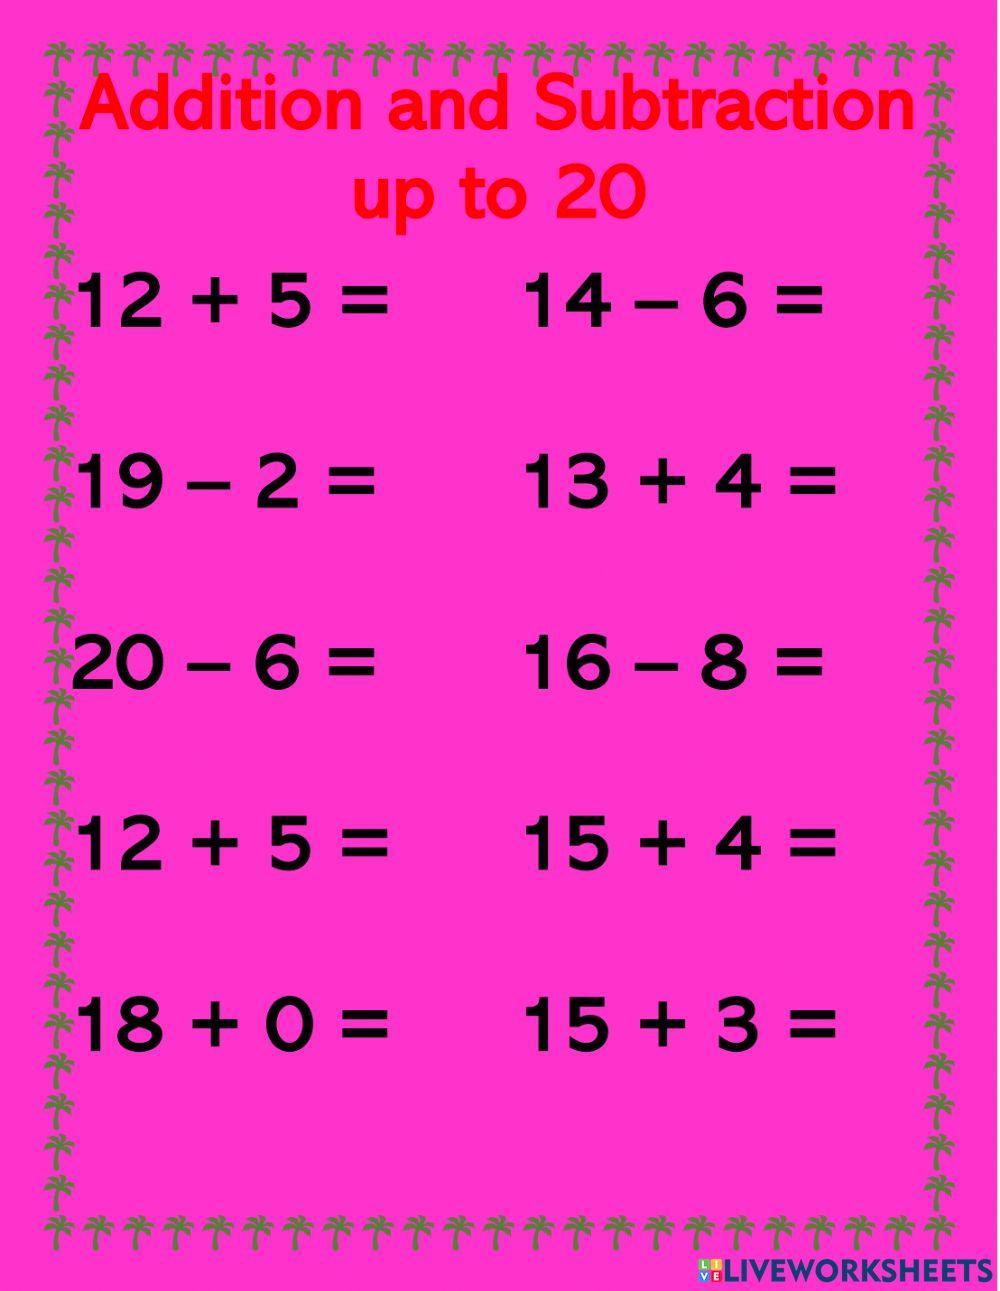 Addition and Subtraction Set 4